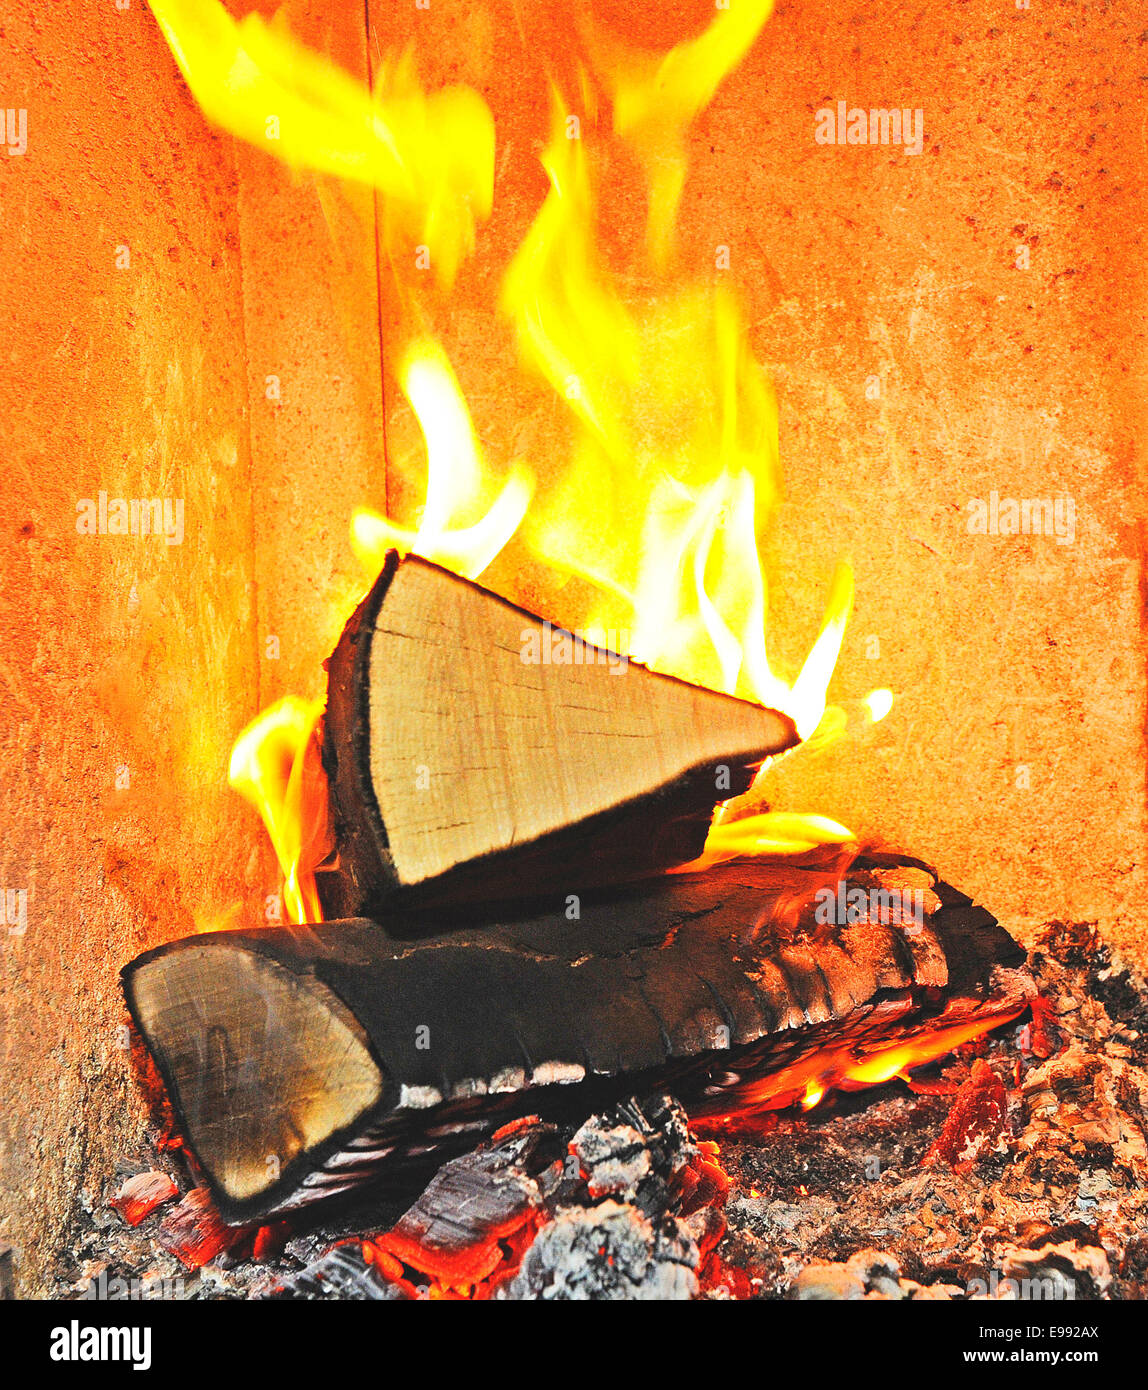 View of burning wood in modern stove  in Tuebingen, southern Germany, on  Oct. 22, 2009. , southern Germany,. Stock Photo